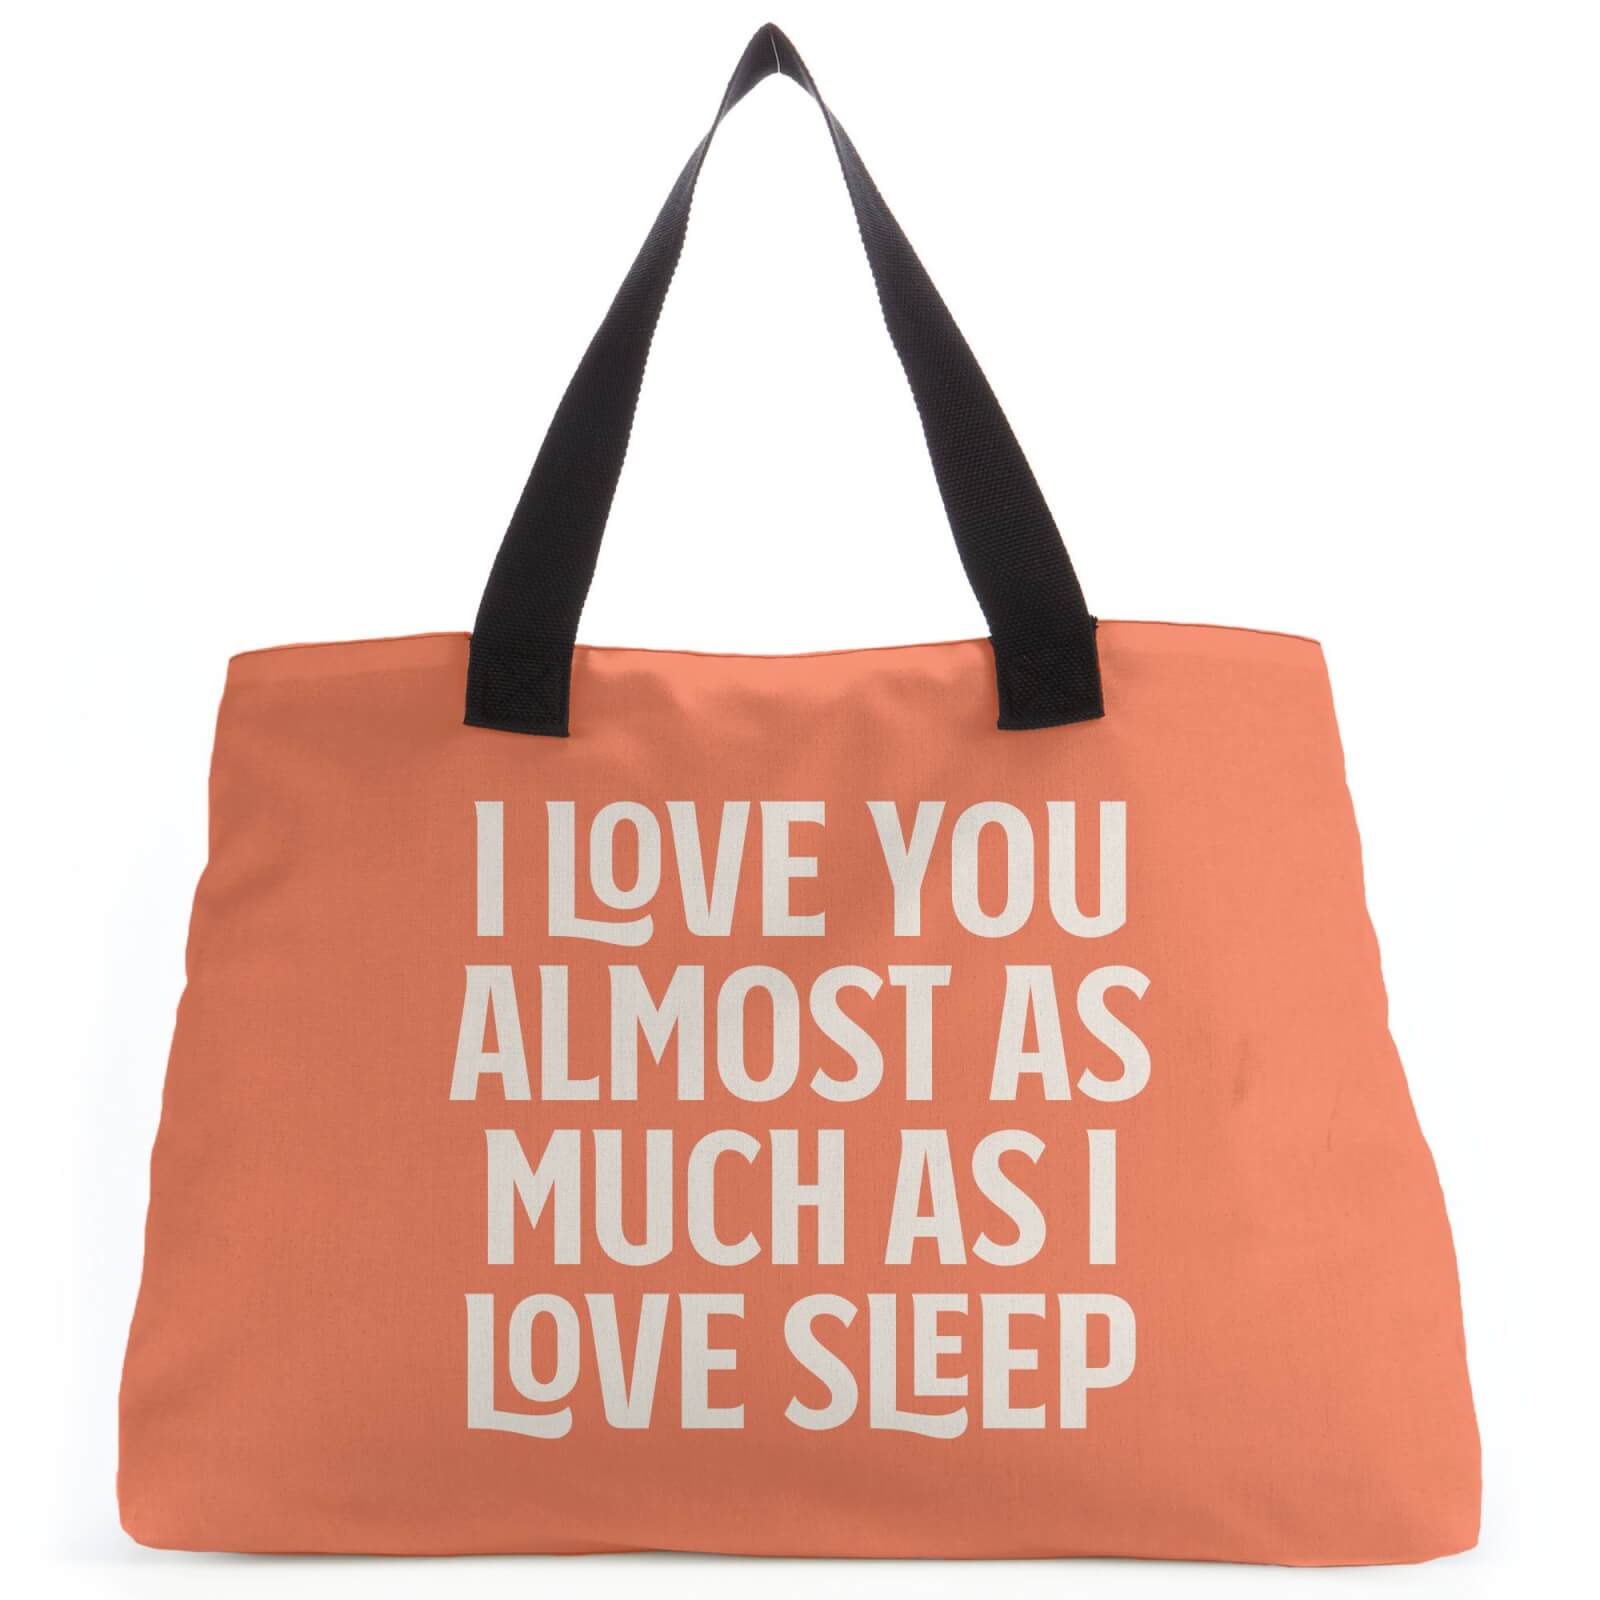 I Love You Almost As Much As I Love Sleep Tote Bag